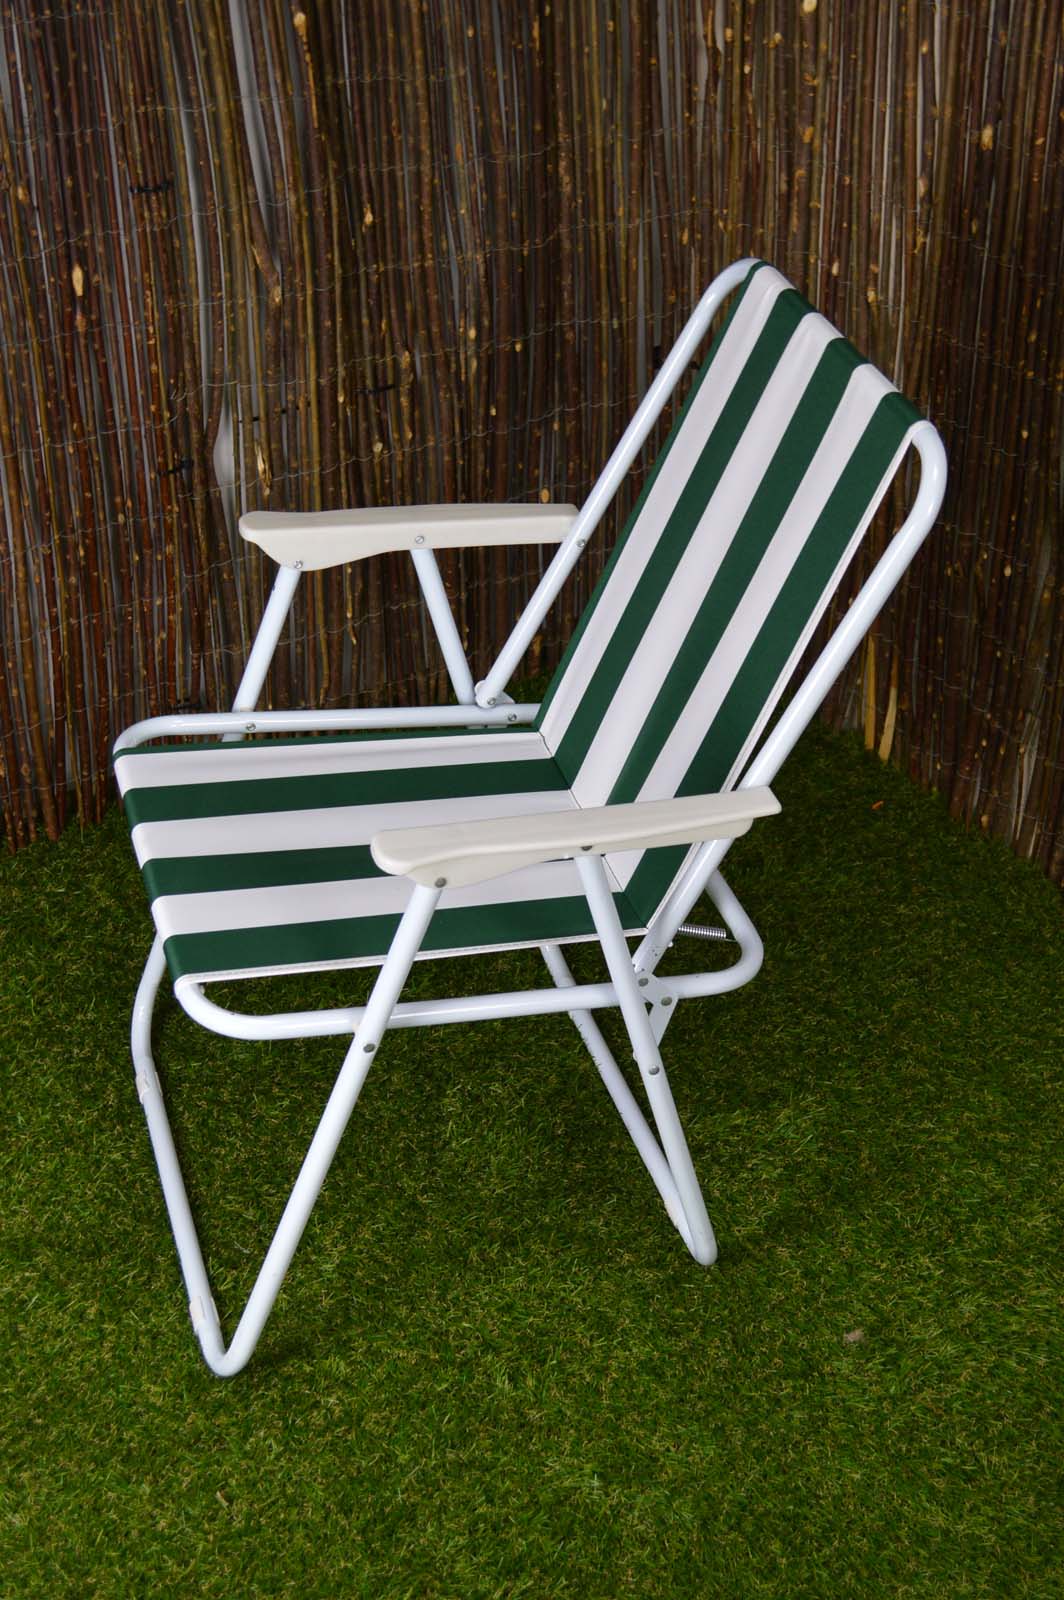 Folding Camping / Picnic Chair in Green and White Garden Patio